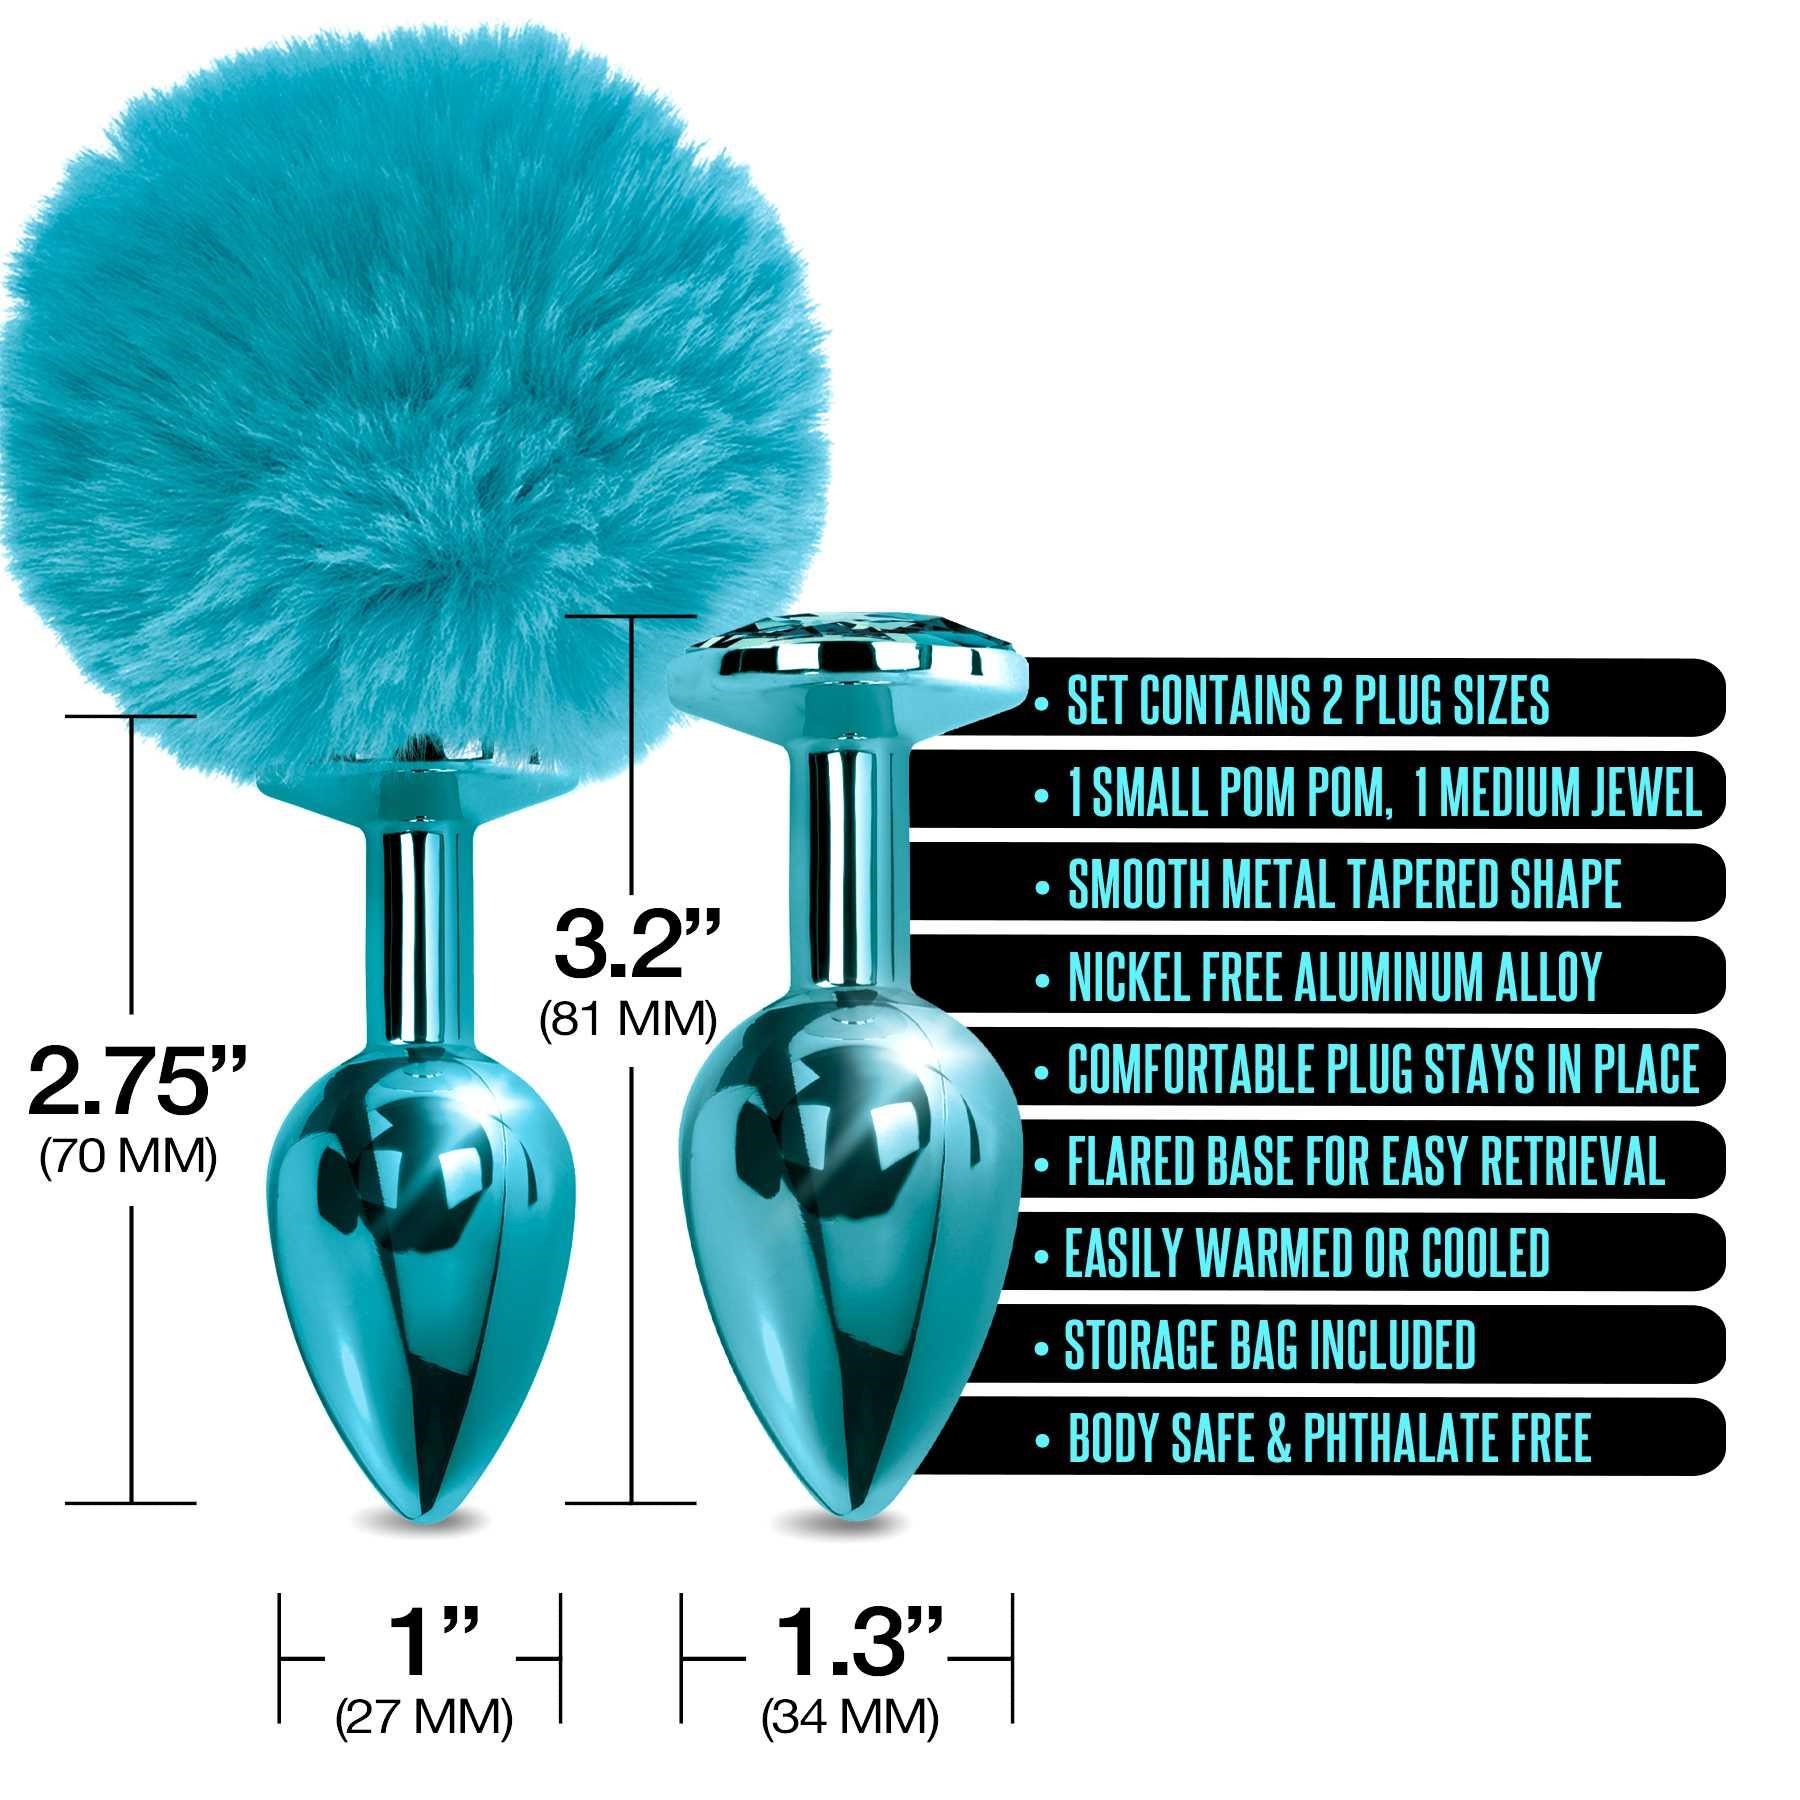 NIXIE Metal Butt Plug Set Pom Pom and Jewel Inlaid Metallic blue features call out sheet